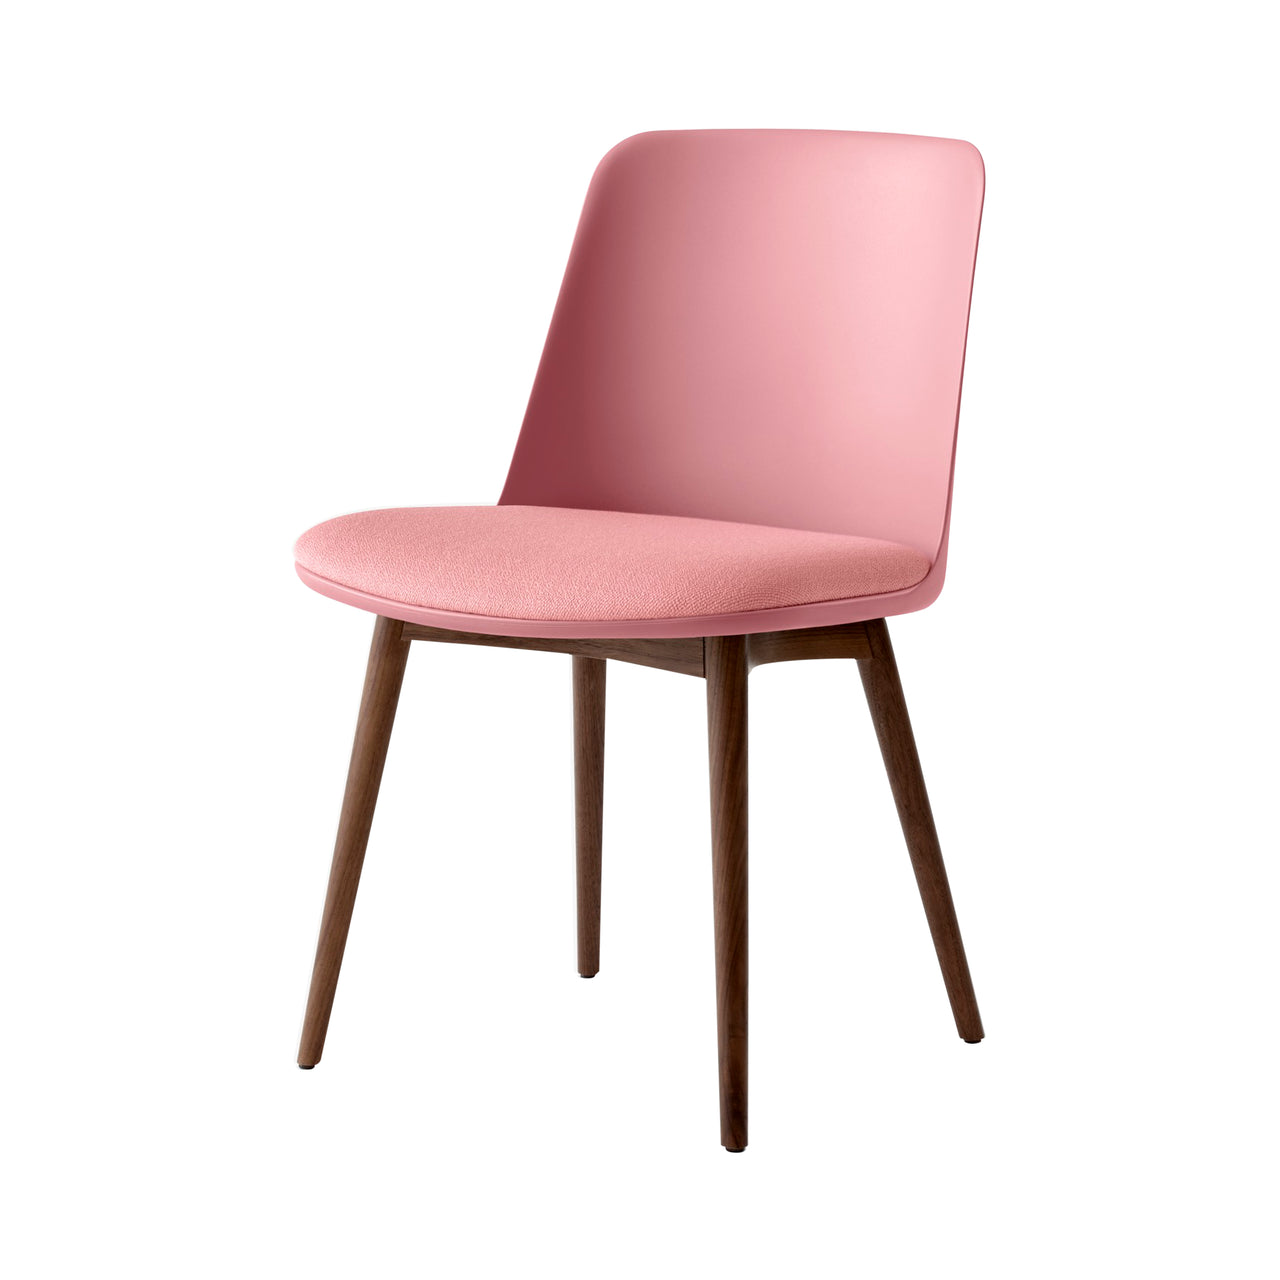 Rely Side Chair HW72: Soft Pink + Walnut